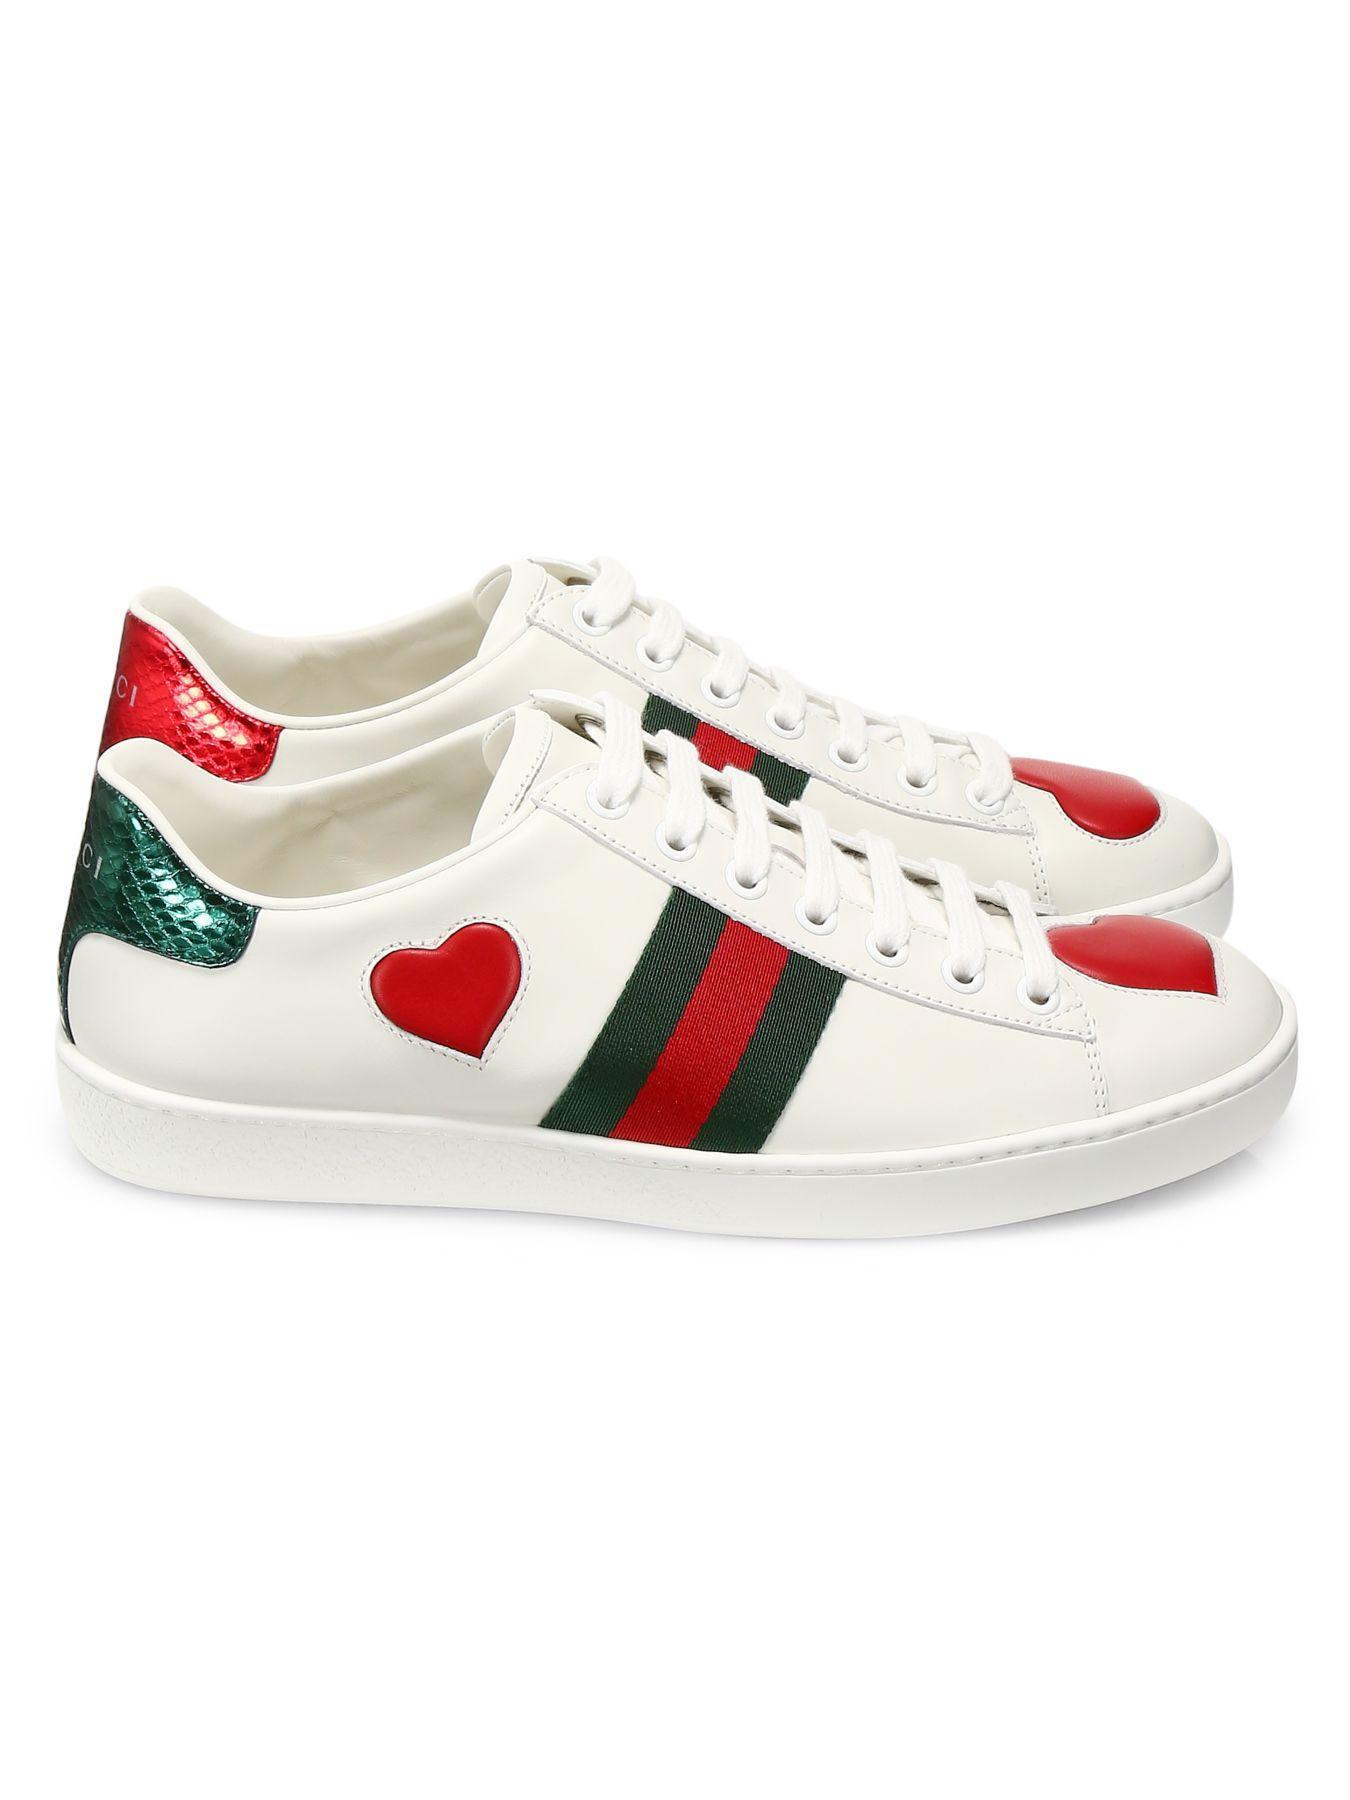 Gucci Leather New Ace Heart Sneakers in White - Save 19% - Lyst